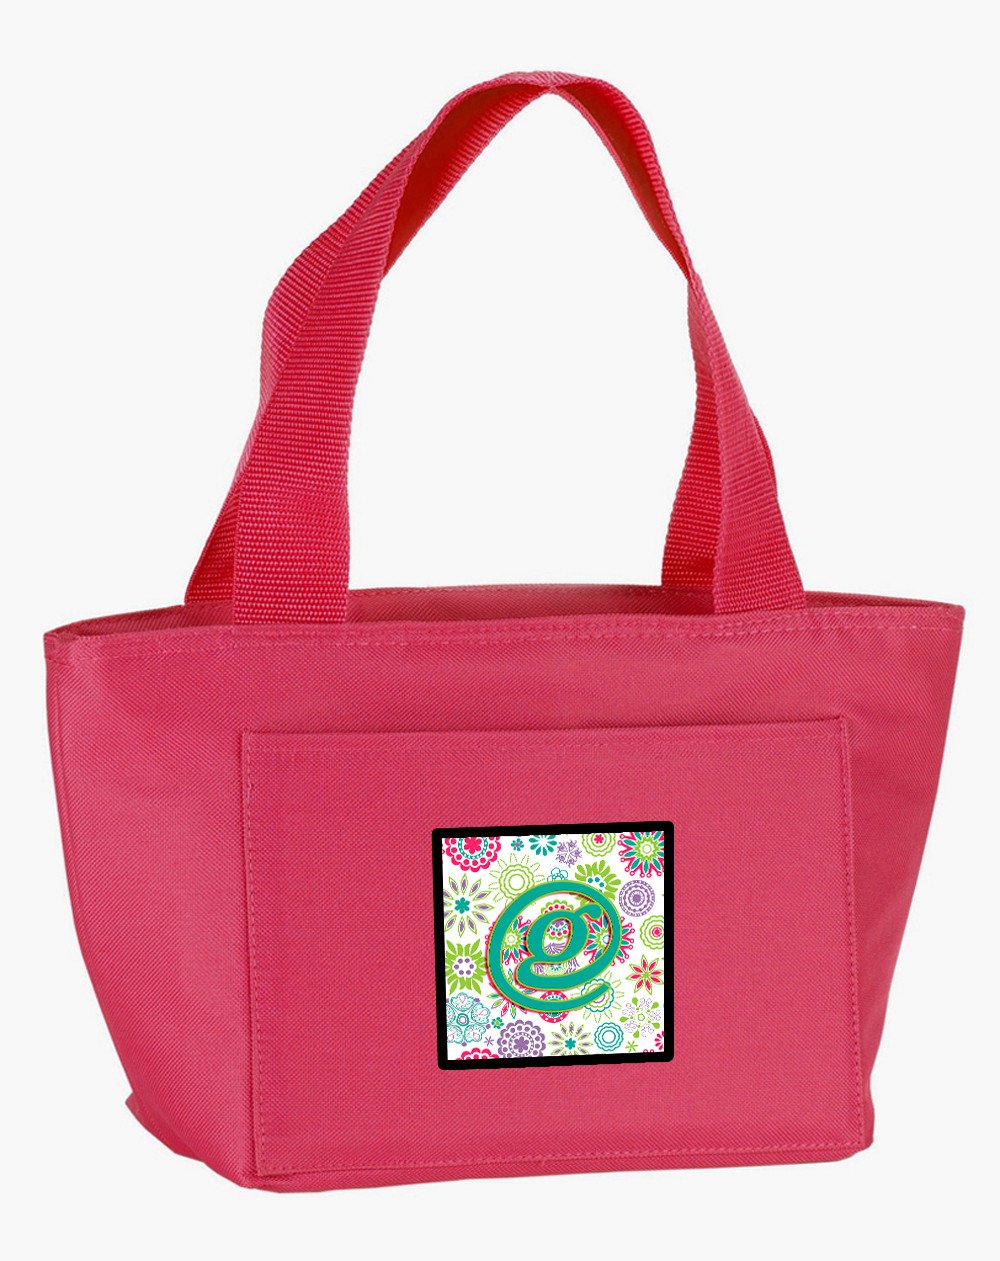 Letter G Flowers Pink Teal Green Initial Lunch Bag CJ2011-GPK-88